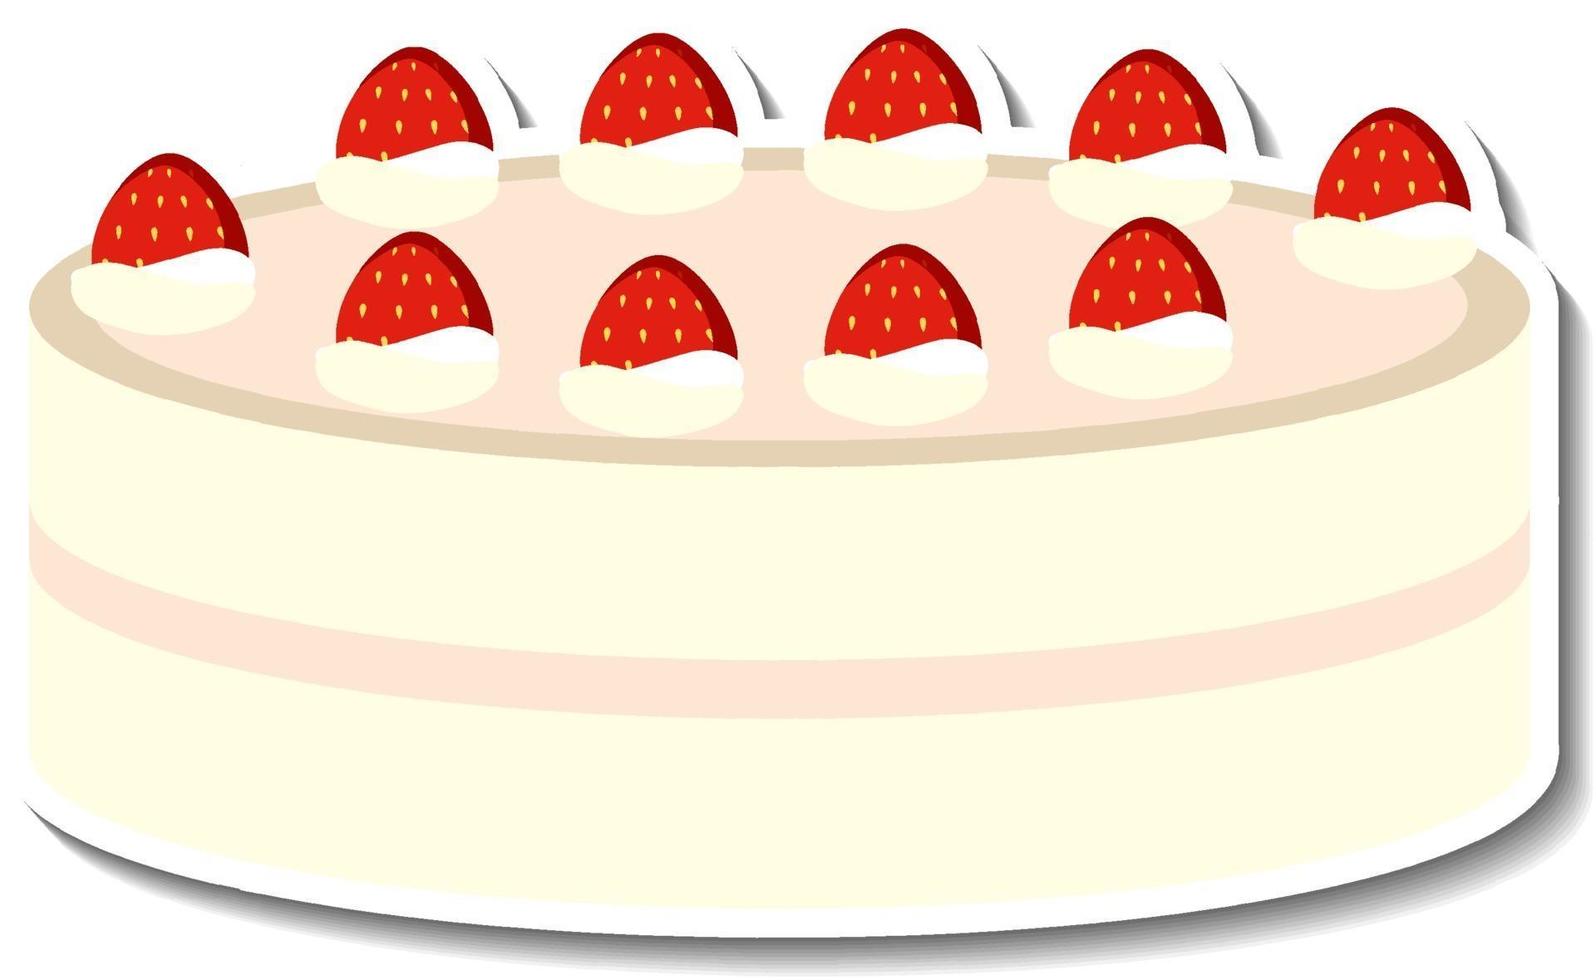 Vanilla cake with strawberry sticker isolated on white background vector